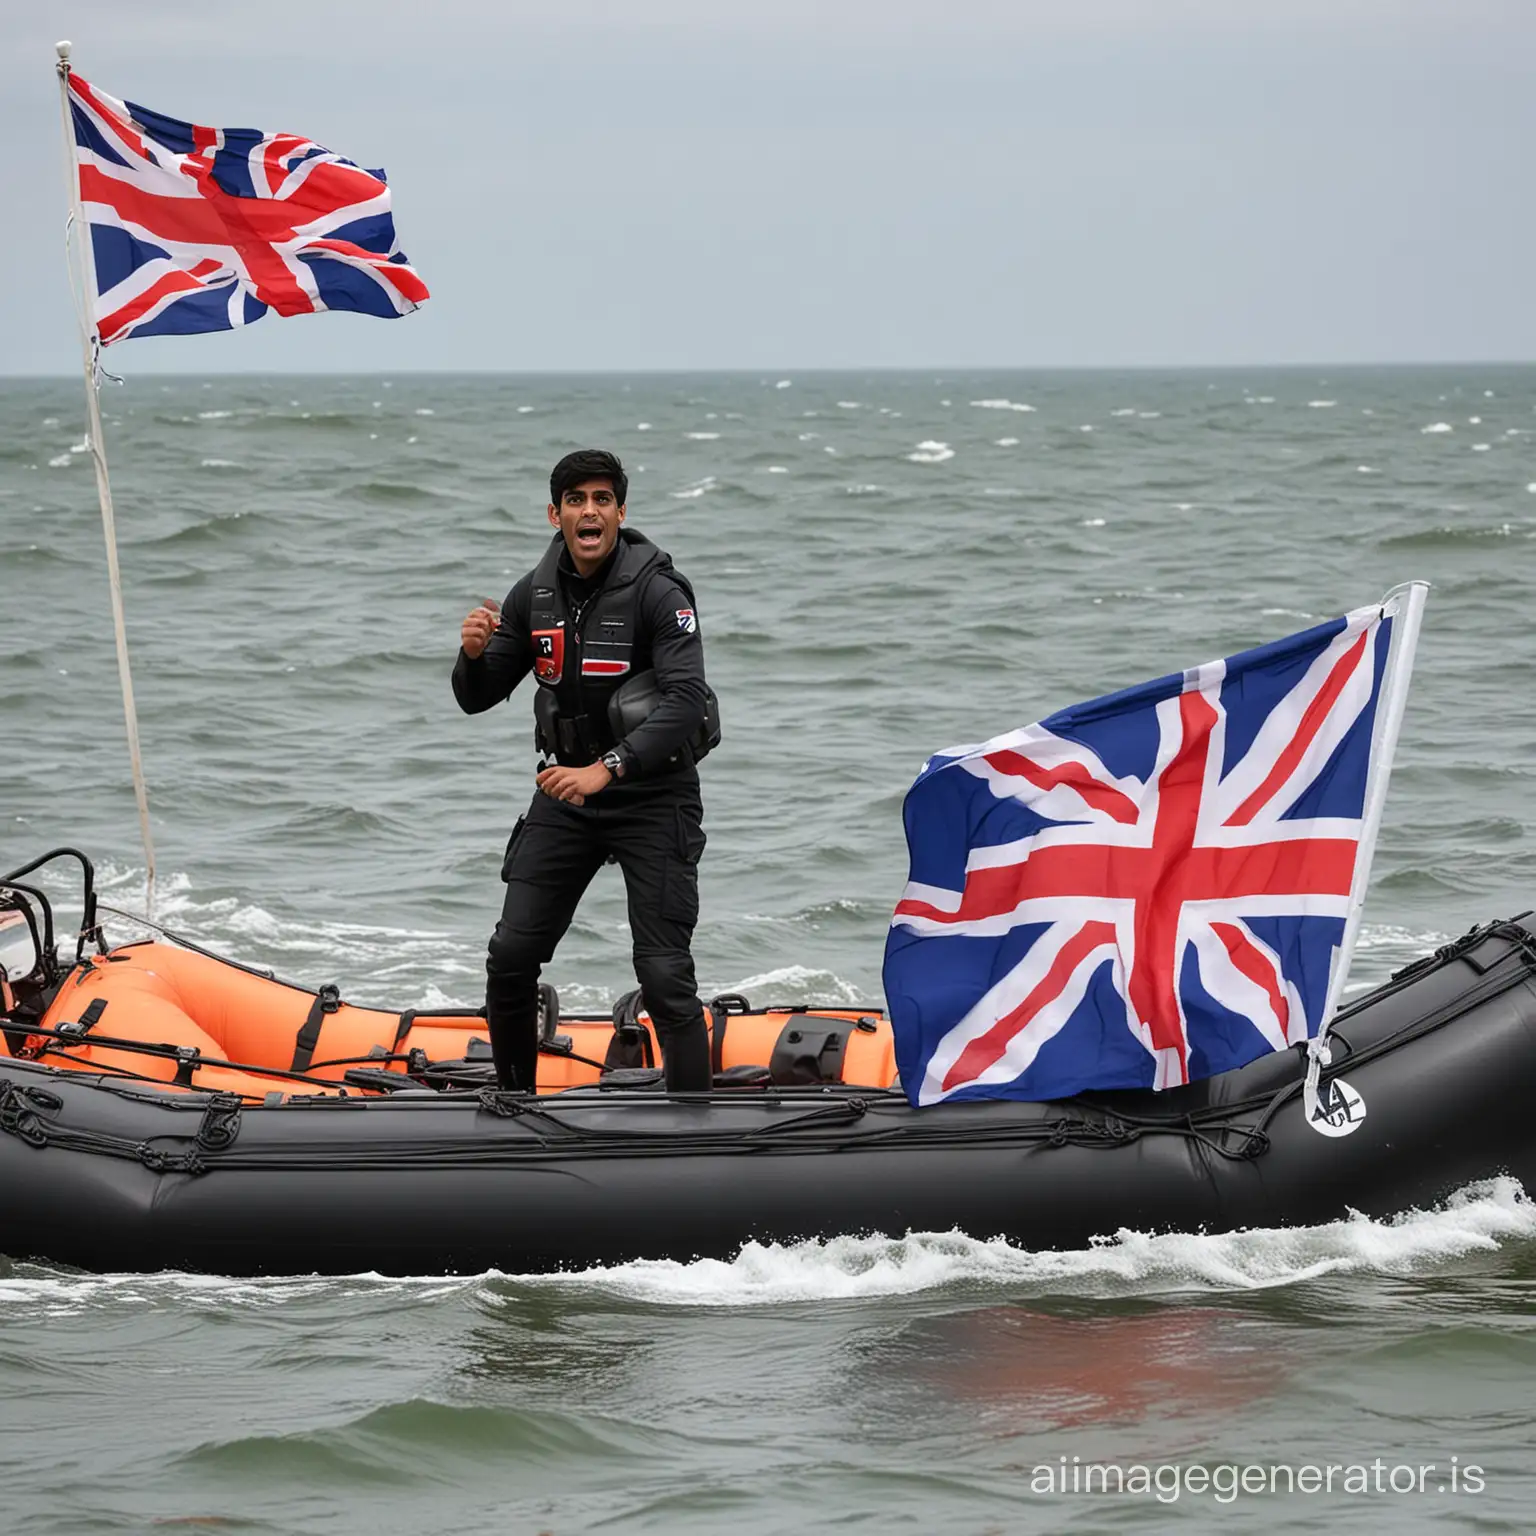 RISHI SUNAK TRYING TO STOP INFLATABLE MIGRANT BOATS ENGLISH FLAG